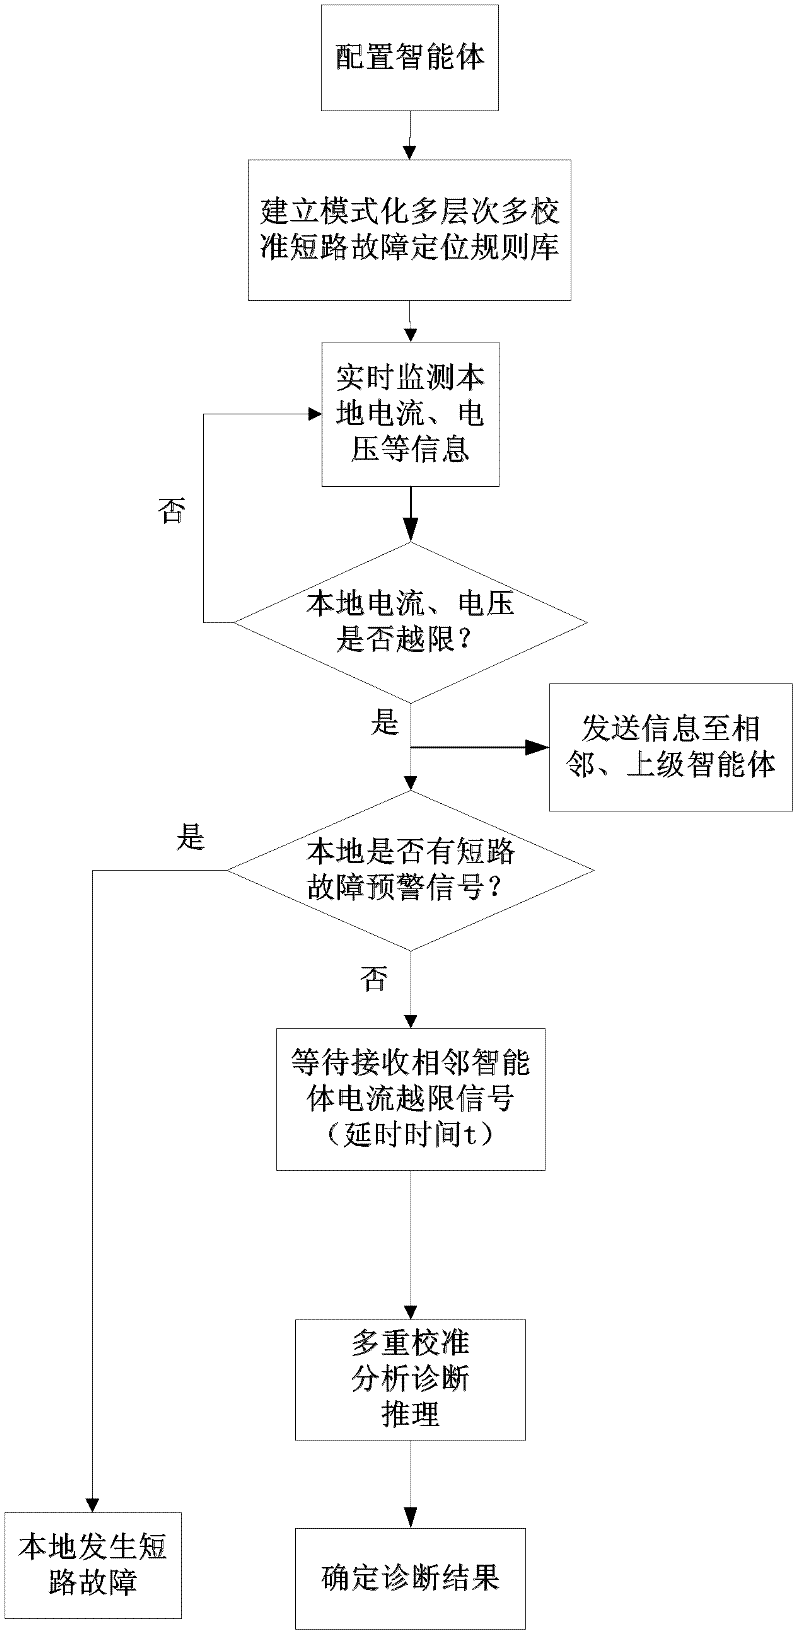 Method for positioning short-circuit fault of distribution network based on distributed intelligent multi-calibration